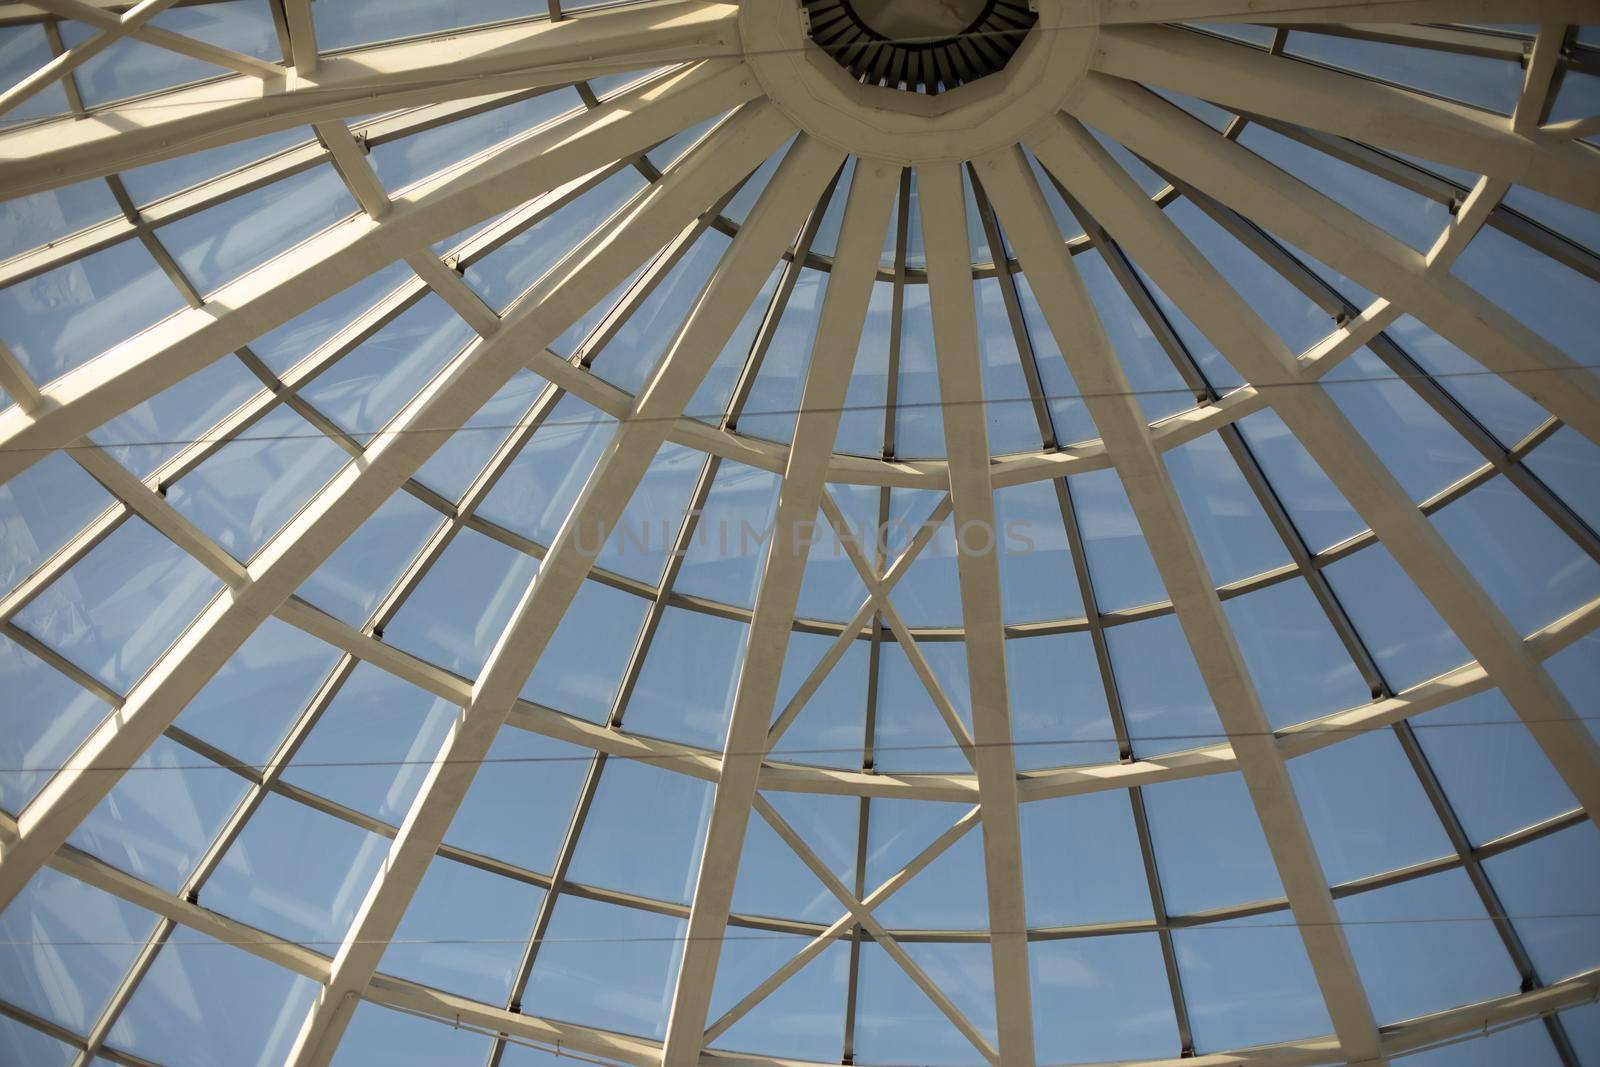 Dome is made of glass. Architecture details. Roof is in shape of sphere. Glazing in building.